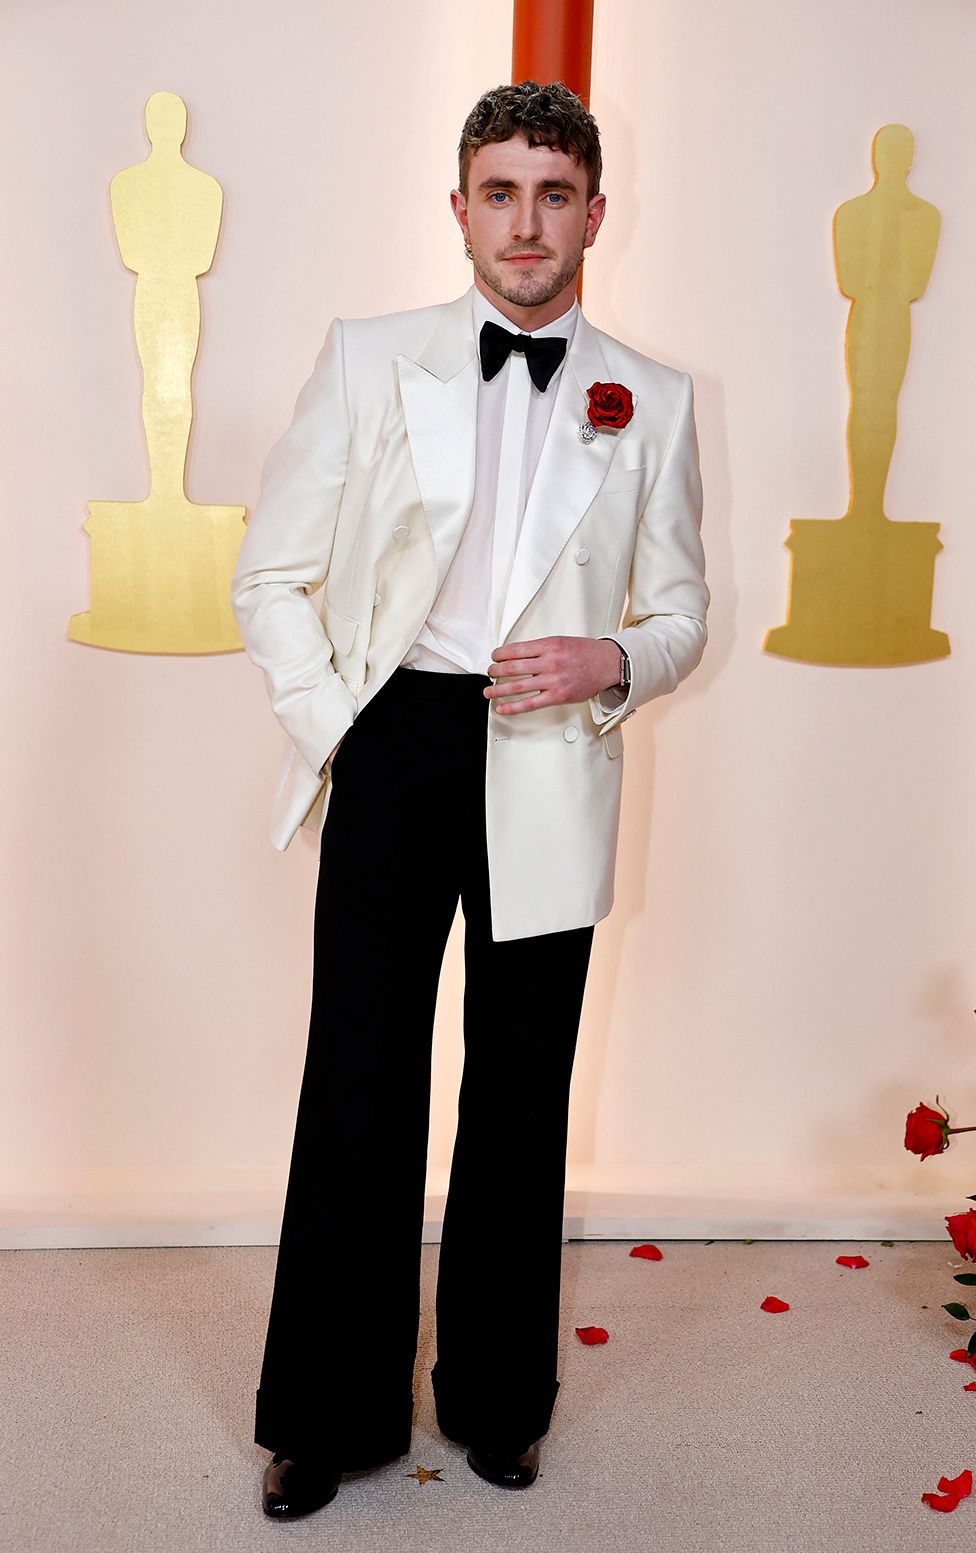 Paul Mescal poses on the champagne-colored red carpet during the Oscars arrivals at the 95th Academy Awards in Hollywood, Los Angeles, California, U.S., March 12, 2023